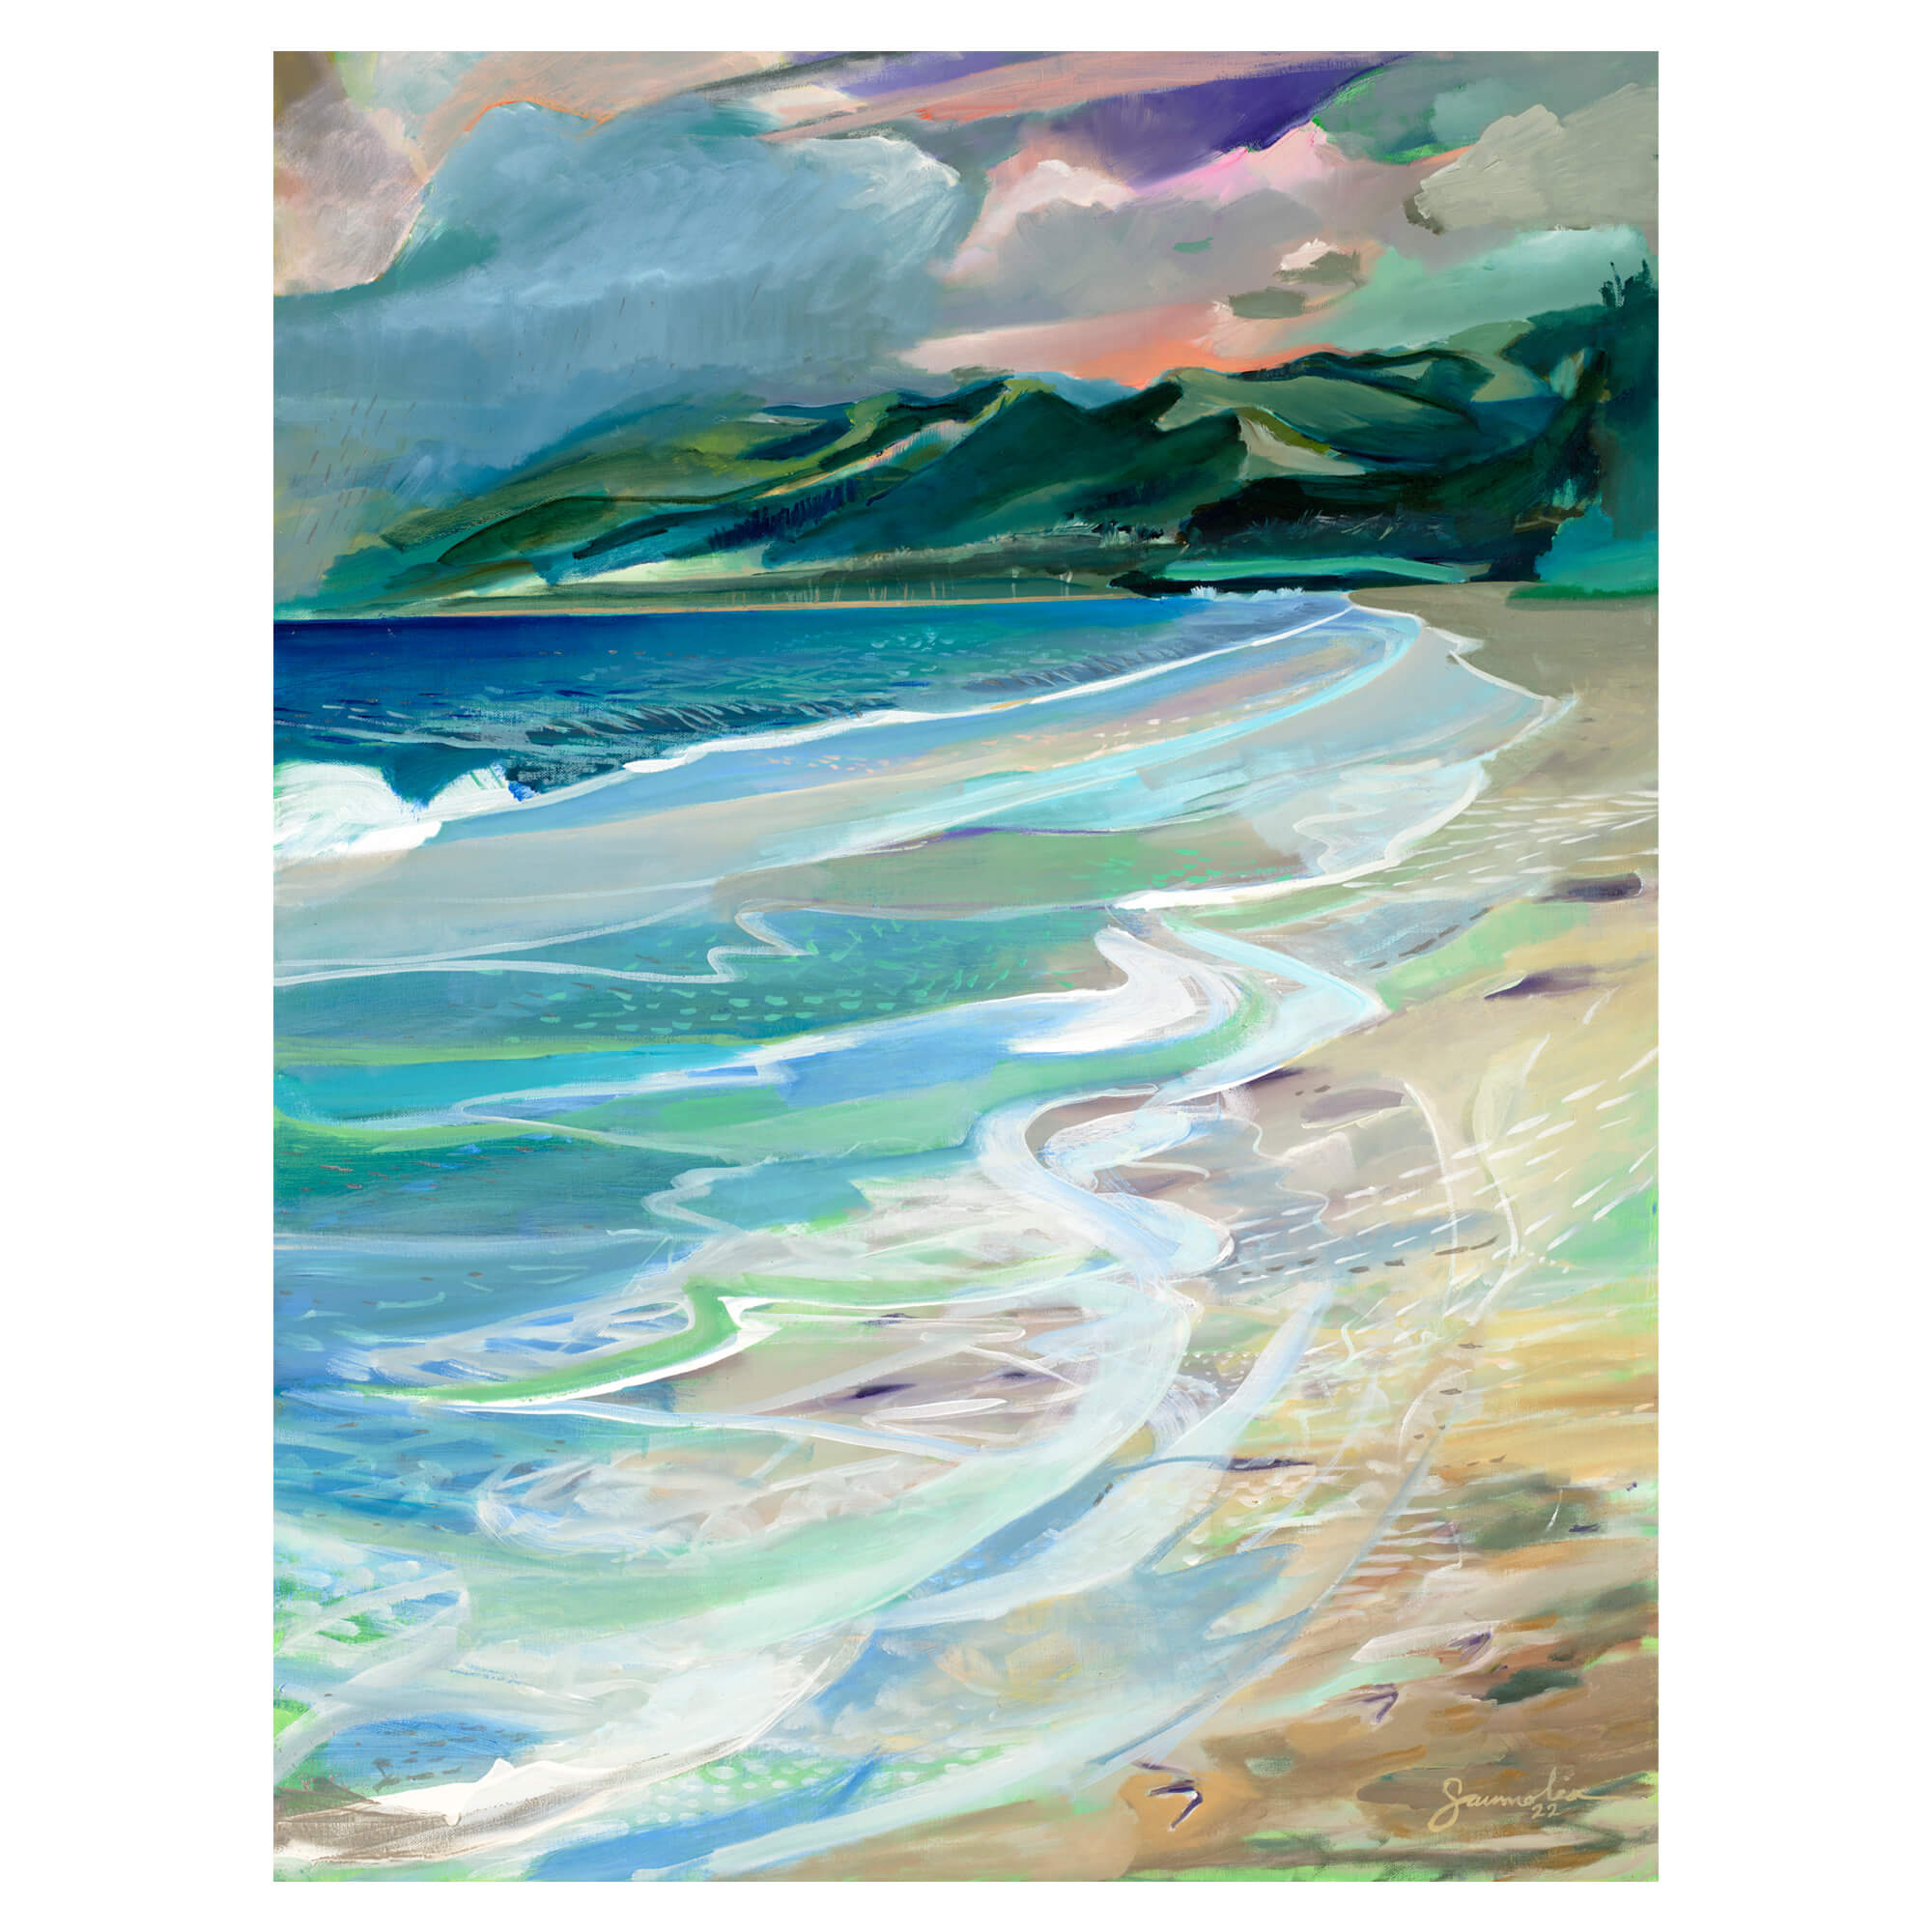 A canvas giclée art print featuring a beautiful abstract landscape with crashing waves and distant mountains by popular Hawaii artist Saumolia Puapuaga